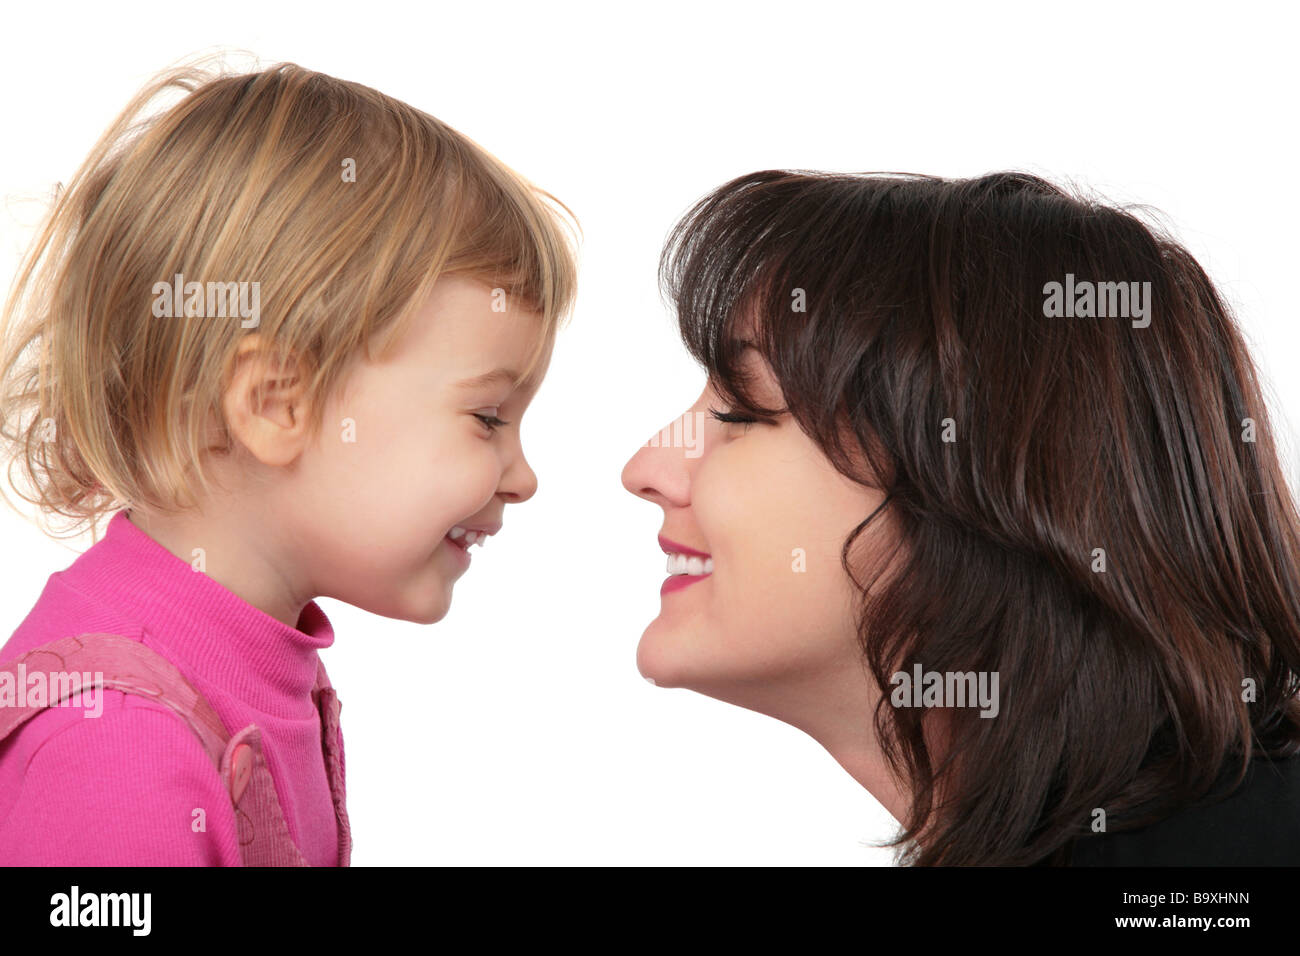 Mother and daughter face-to-face Stock Photo